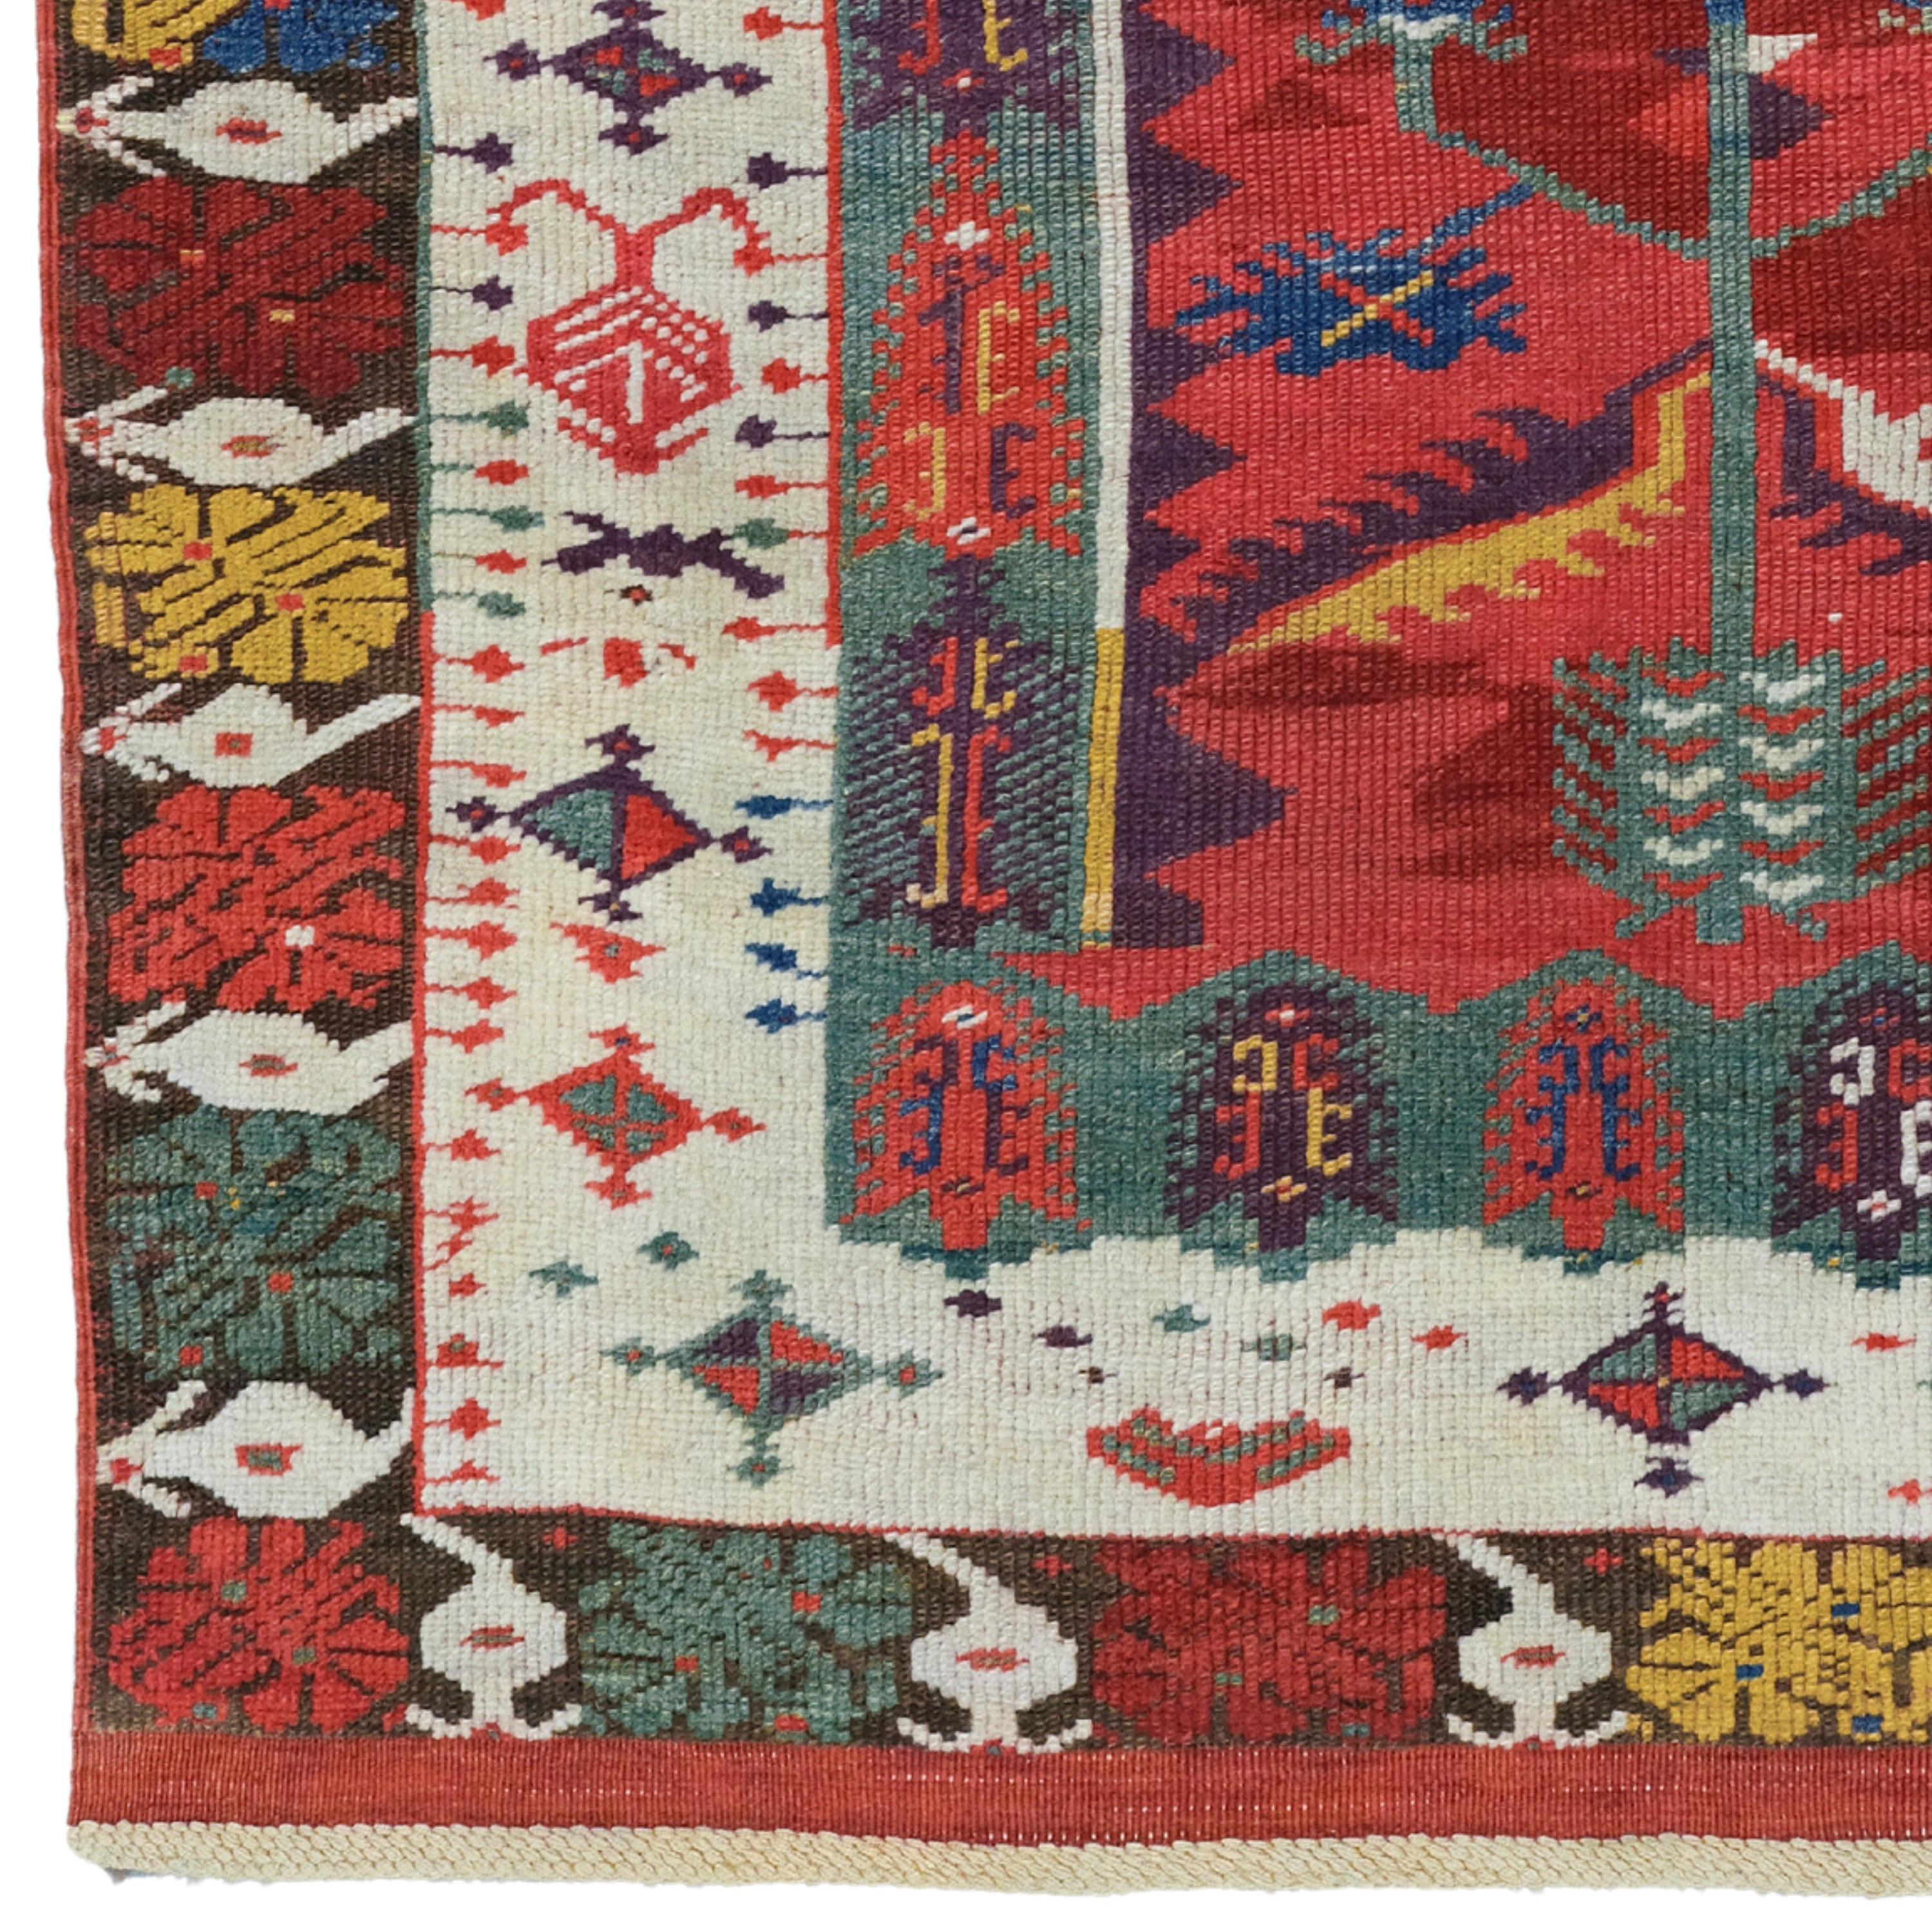 Antique Milas Prayer Rug - 19th Century Anatolian Rug

This carpet, woven in the Milas region in the southwestern part of Anatolia, is woven using the traditional hand-woven method. This carpet, which draws attention with its antique patterns and